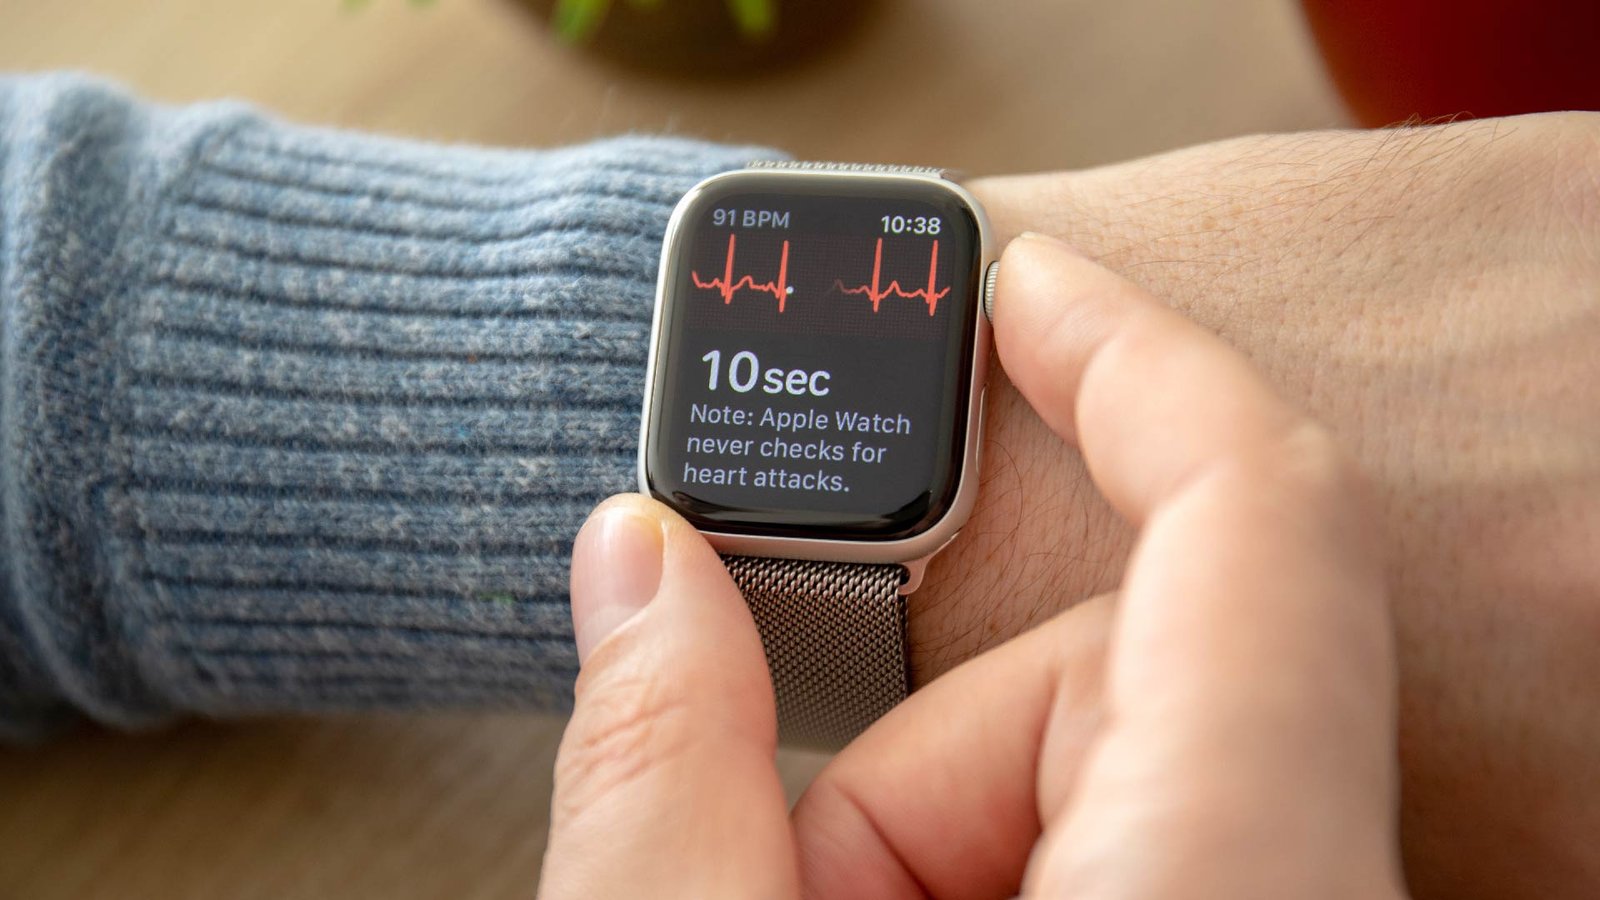 Apple Watch Saves Man's Life with Real-Time ECG